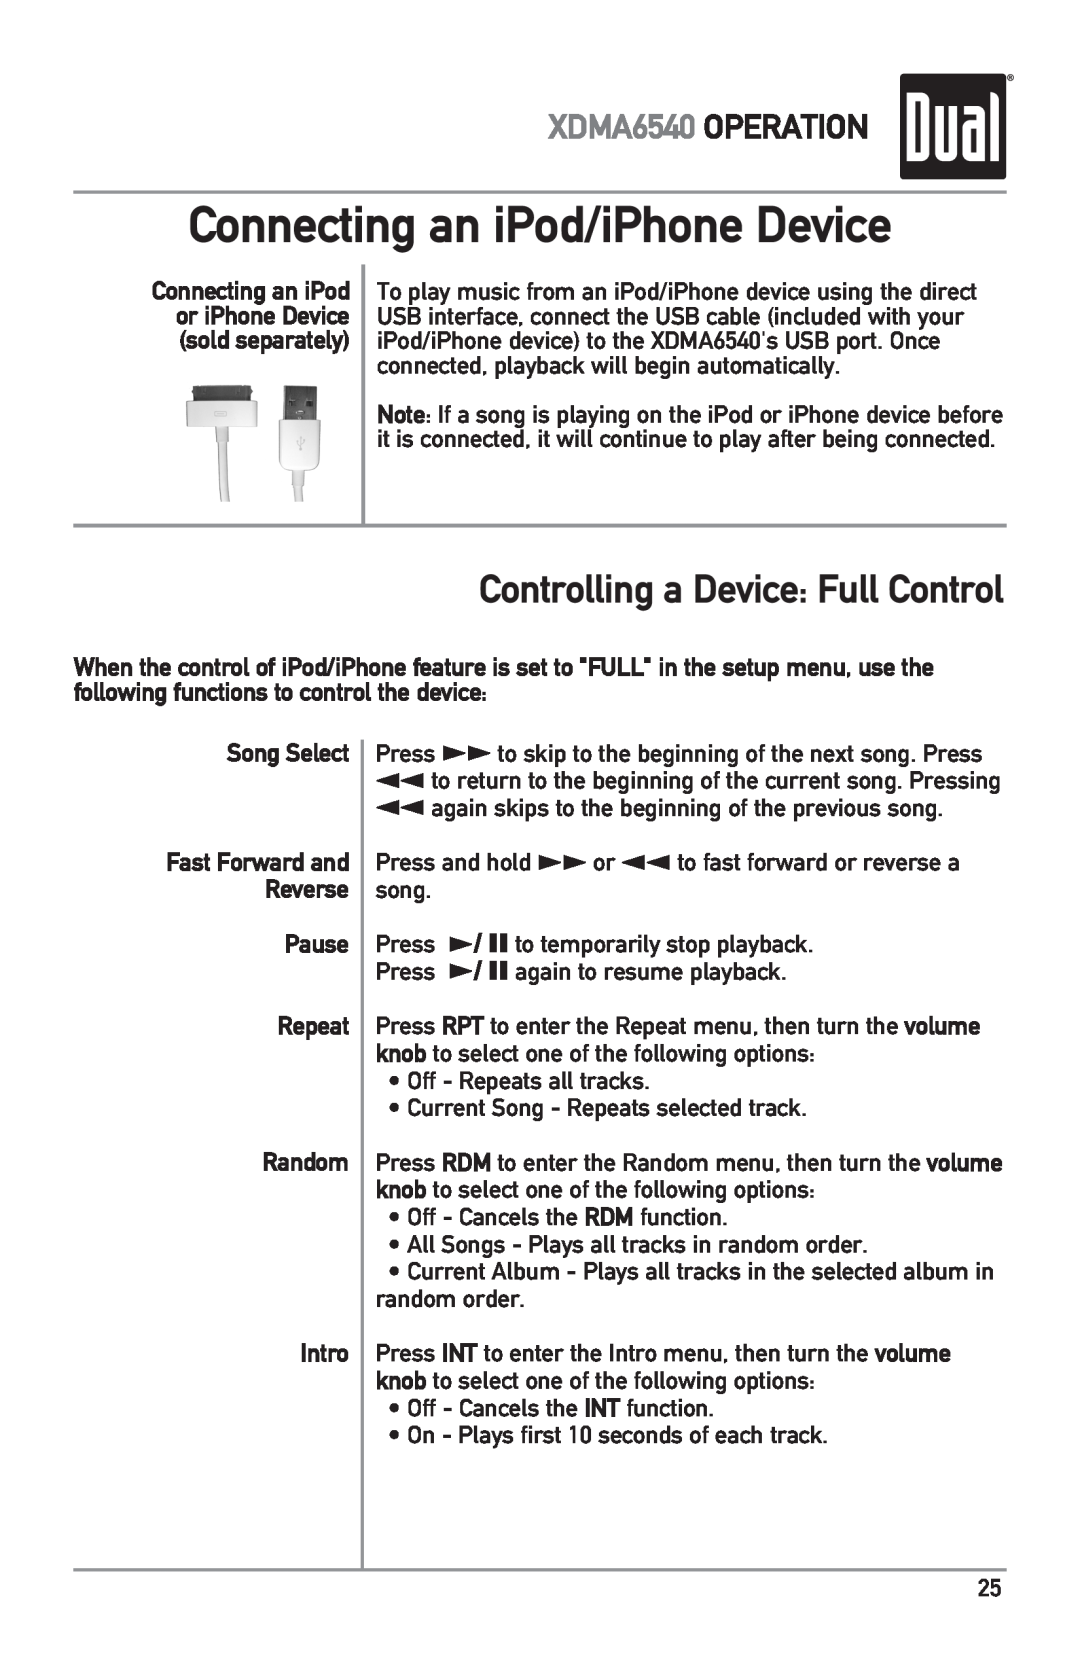 Dual owner manual Connecting an iPod/iPhone Device, Controlling a Device Full Control, XDMA6540 OPERATION, Song Select 